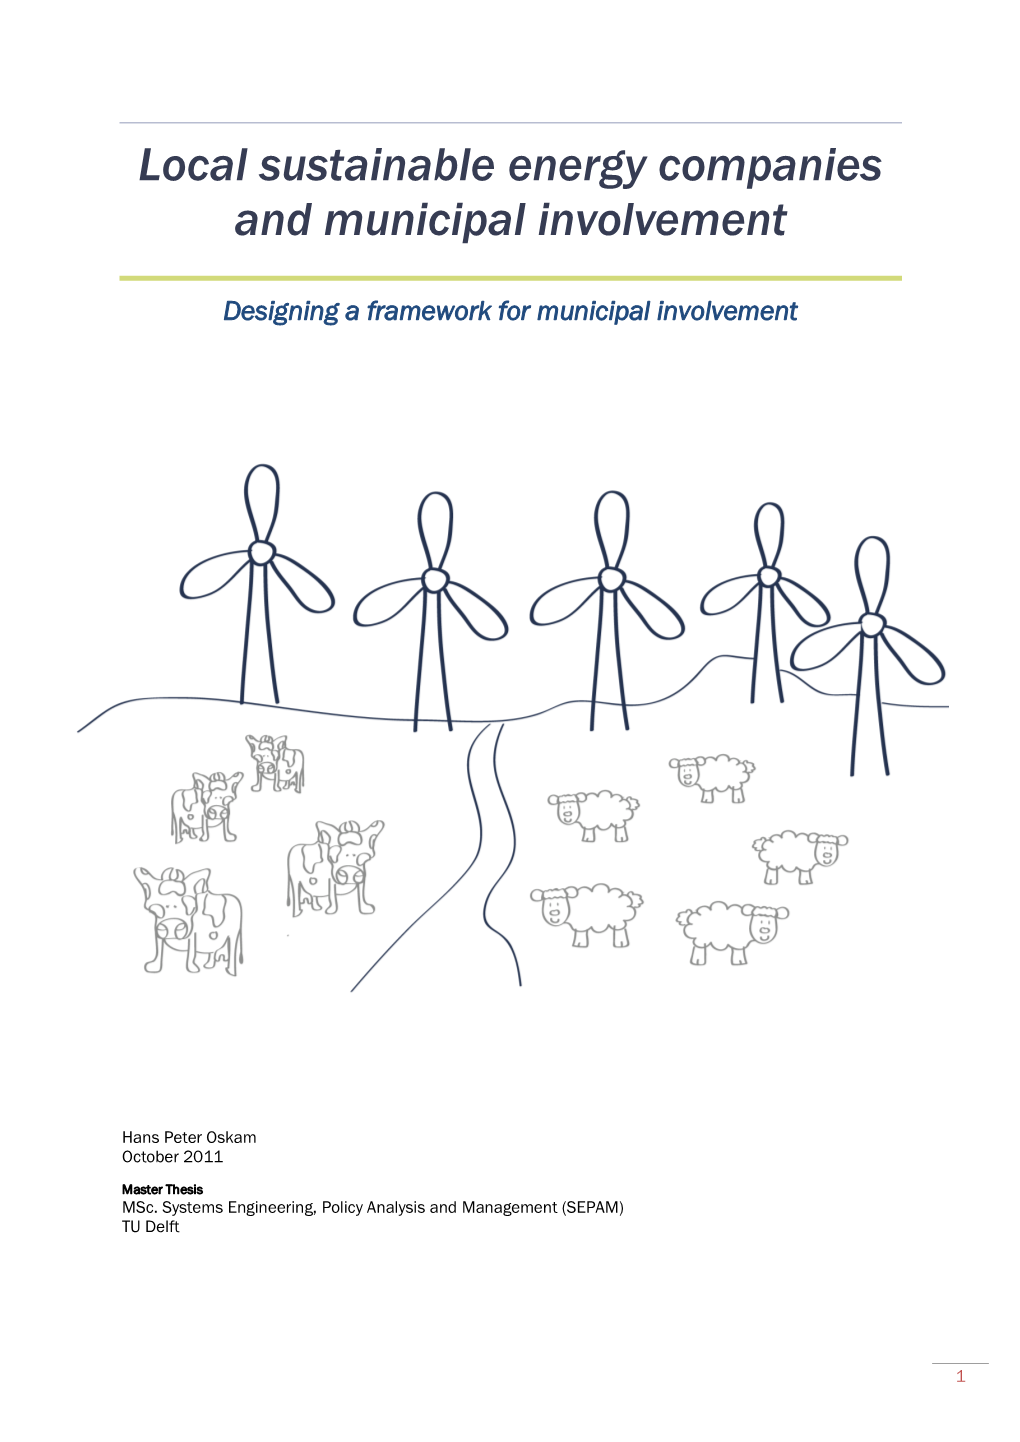 Local Sustainable Energy Companies and Municipal Involvement